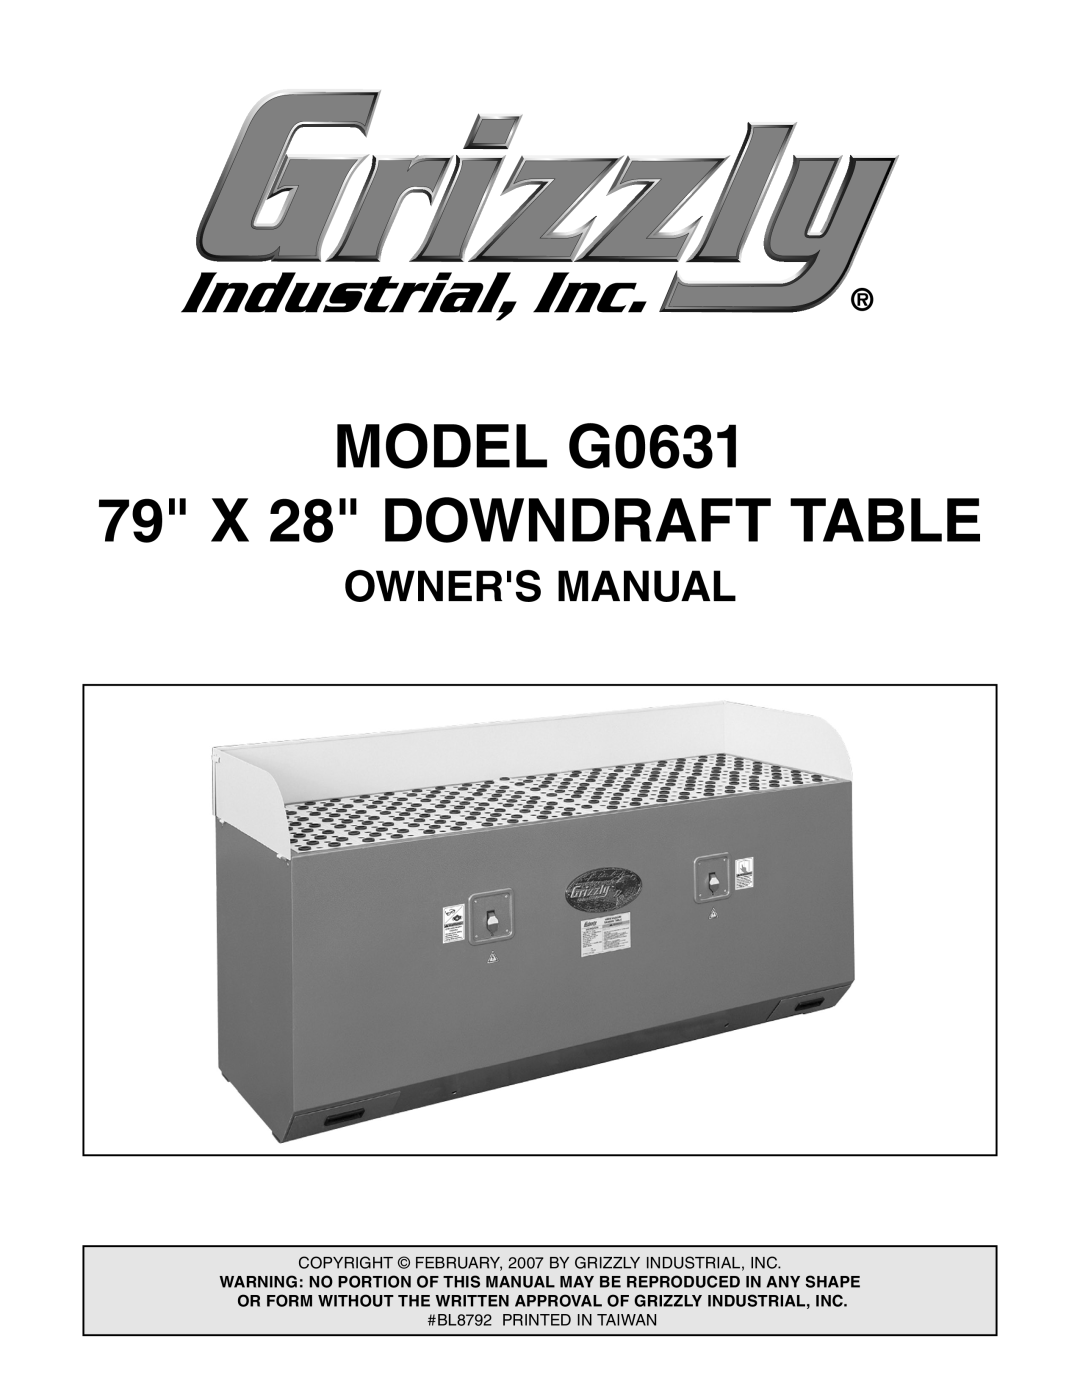 Grizzly owner manual Owners Manual, MODEL G0631 79 X 28 DOWNDRAFT TABLE 